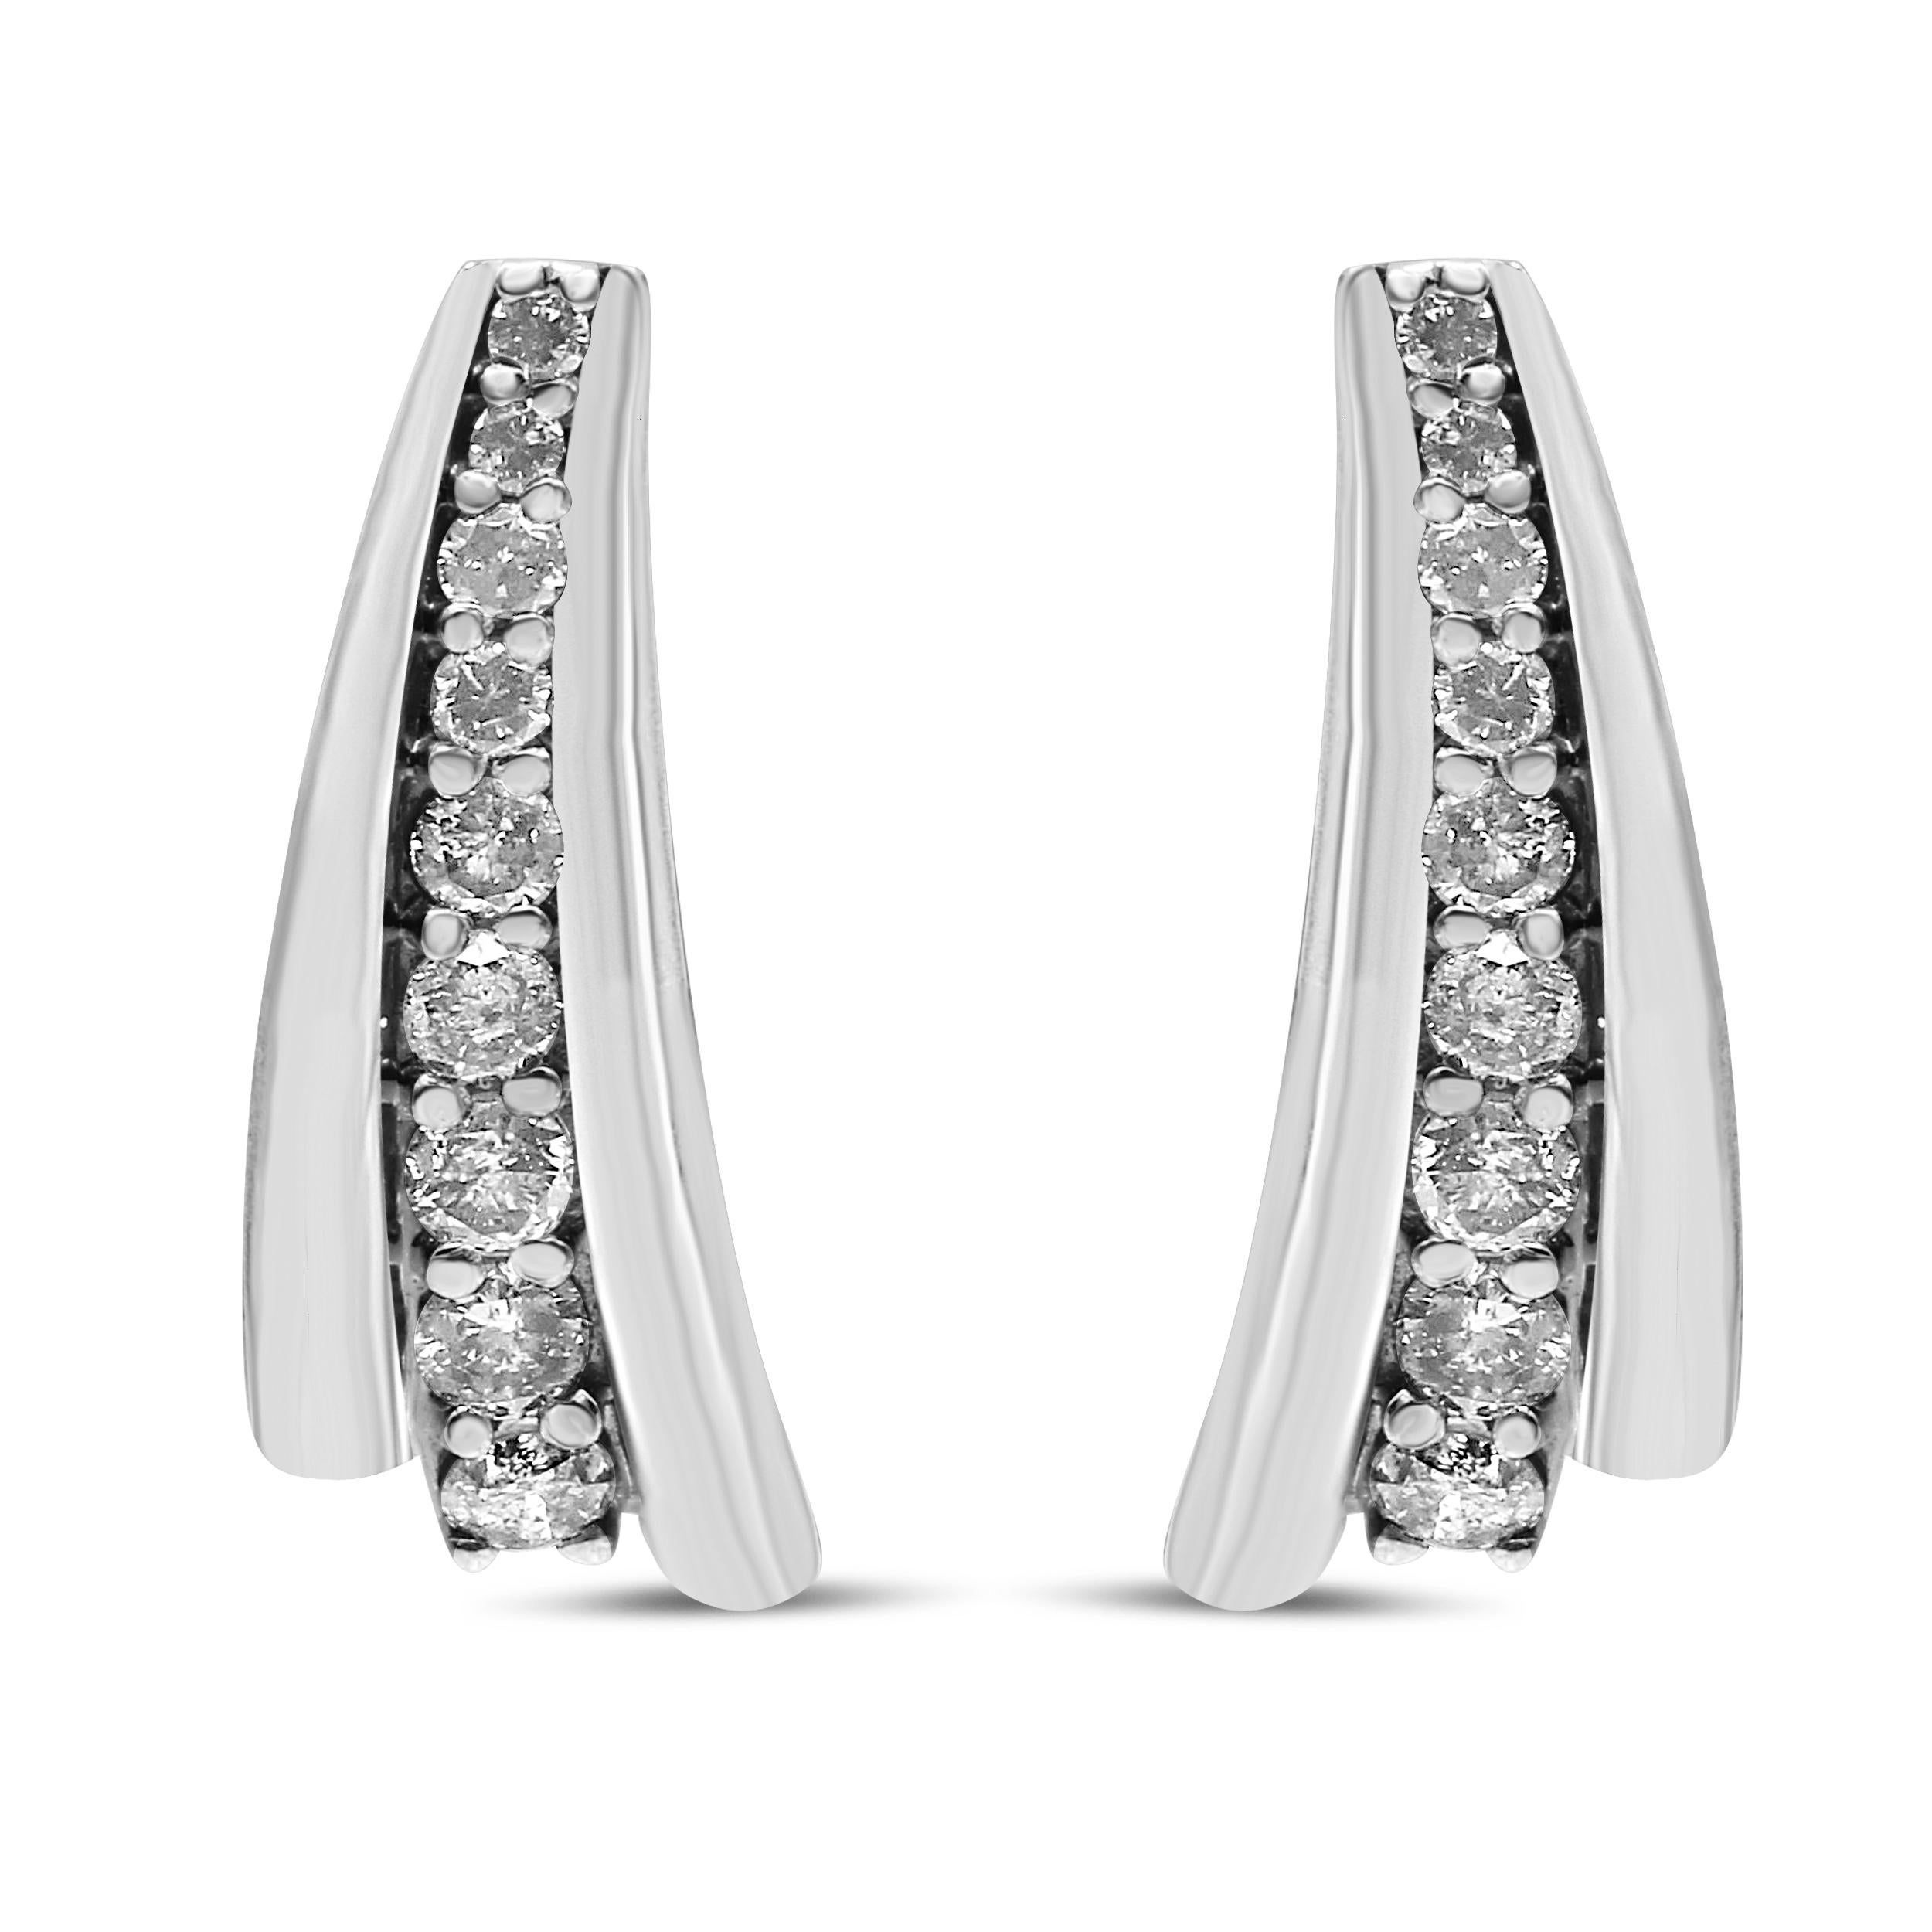 Brilliant round diamonds in prong setting subtly graduate in size from smallest at the top to largest at the bottom to create these sparkling huggie earrings for her. Embraced on both sides by polished .924 sterling silver, these diamonds nestle in